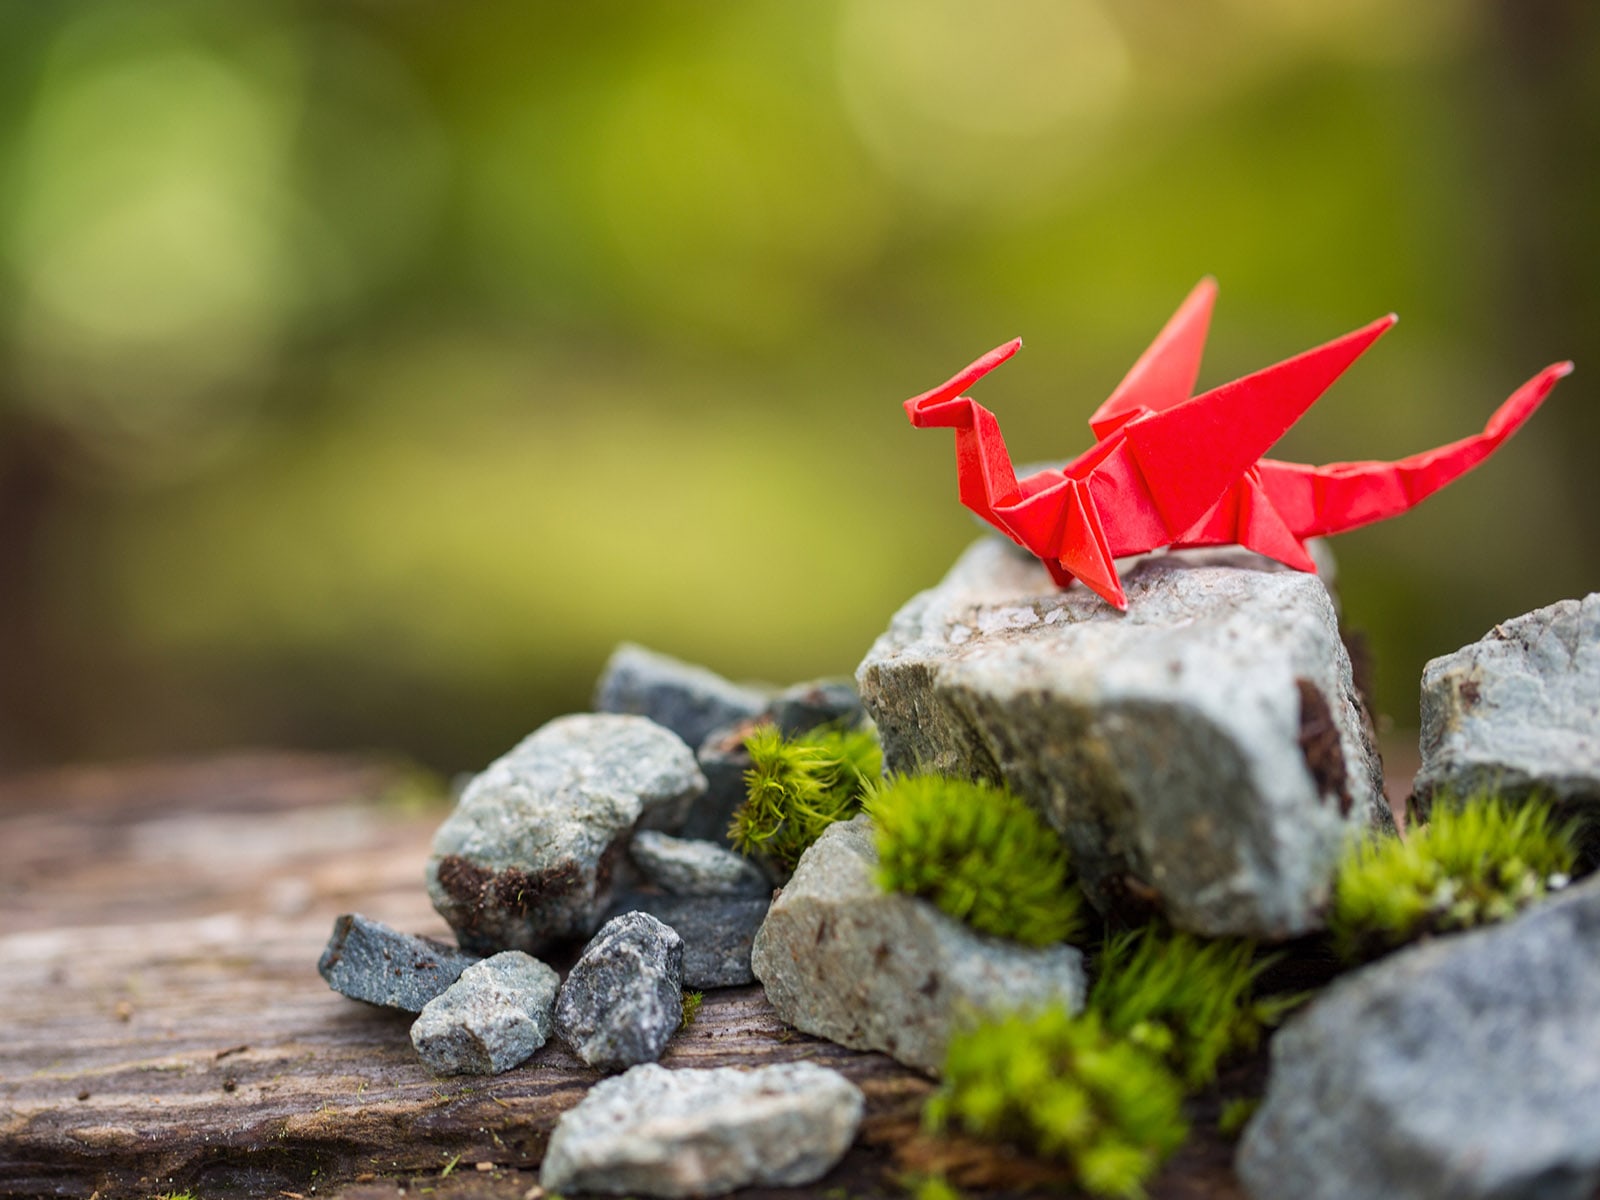 A dragon crafted from red origami paper sitting on a mossy rock